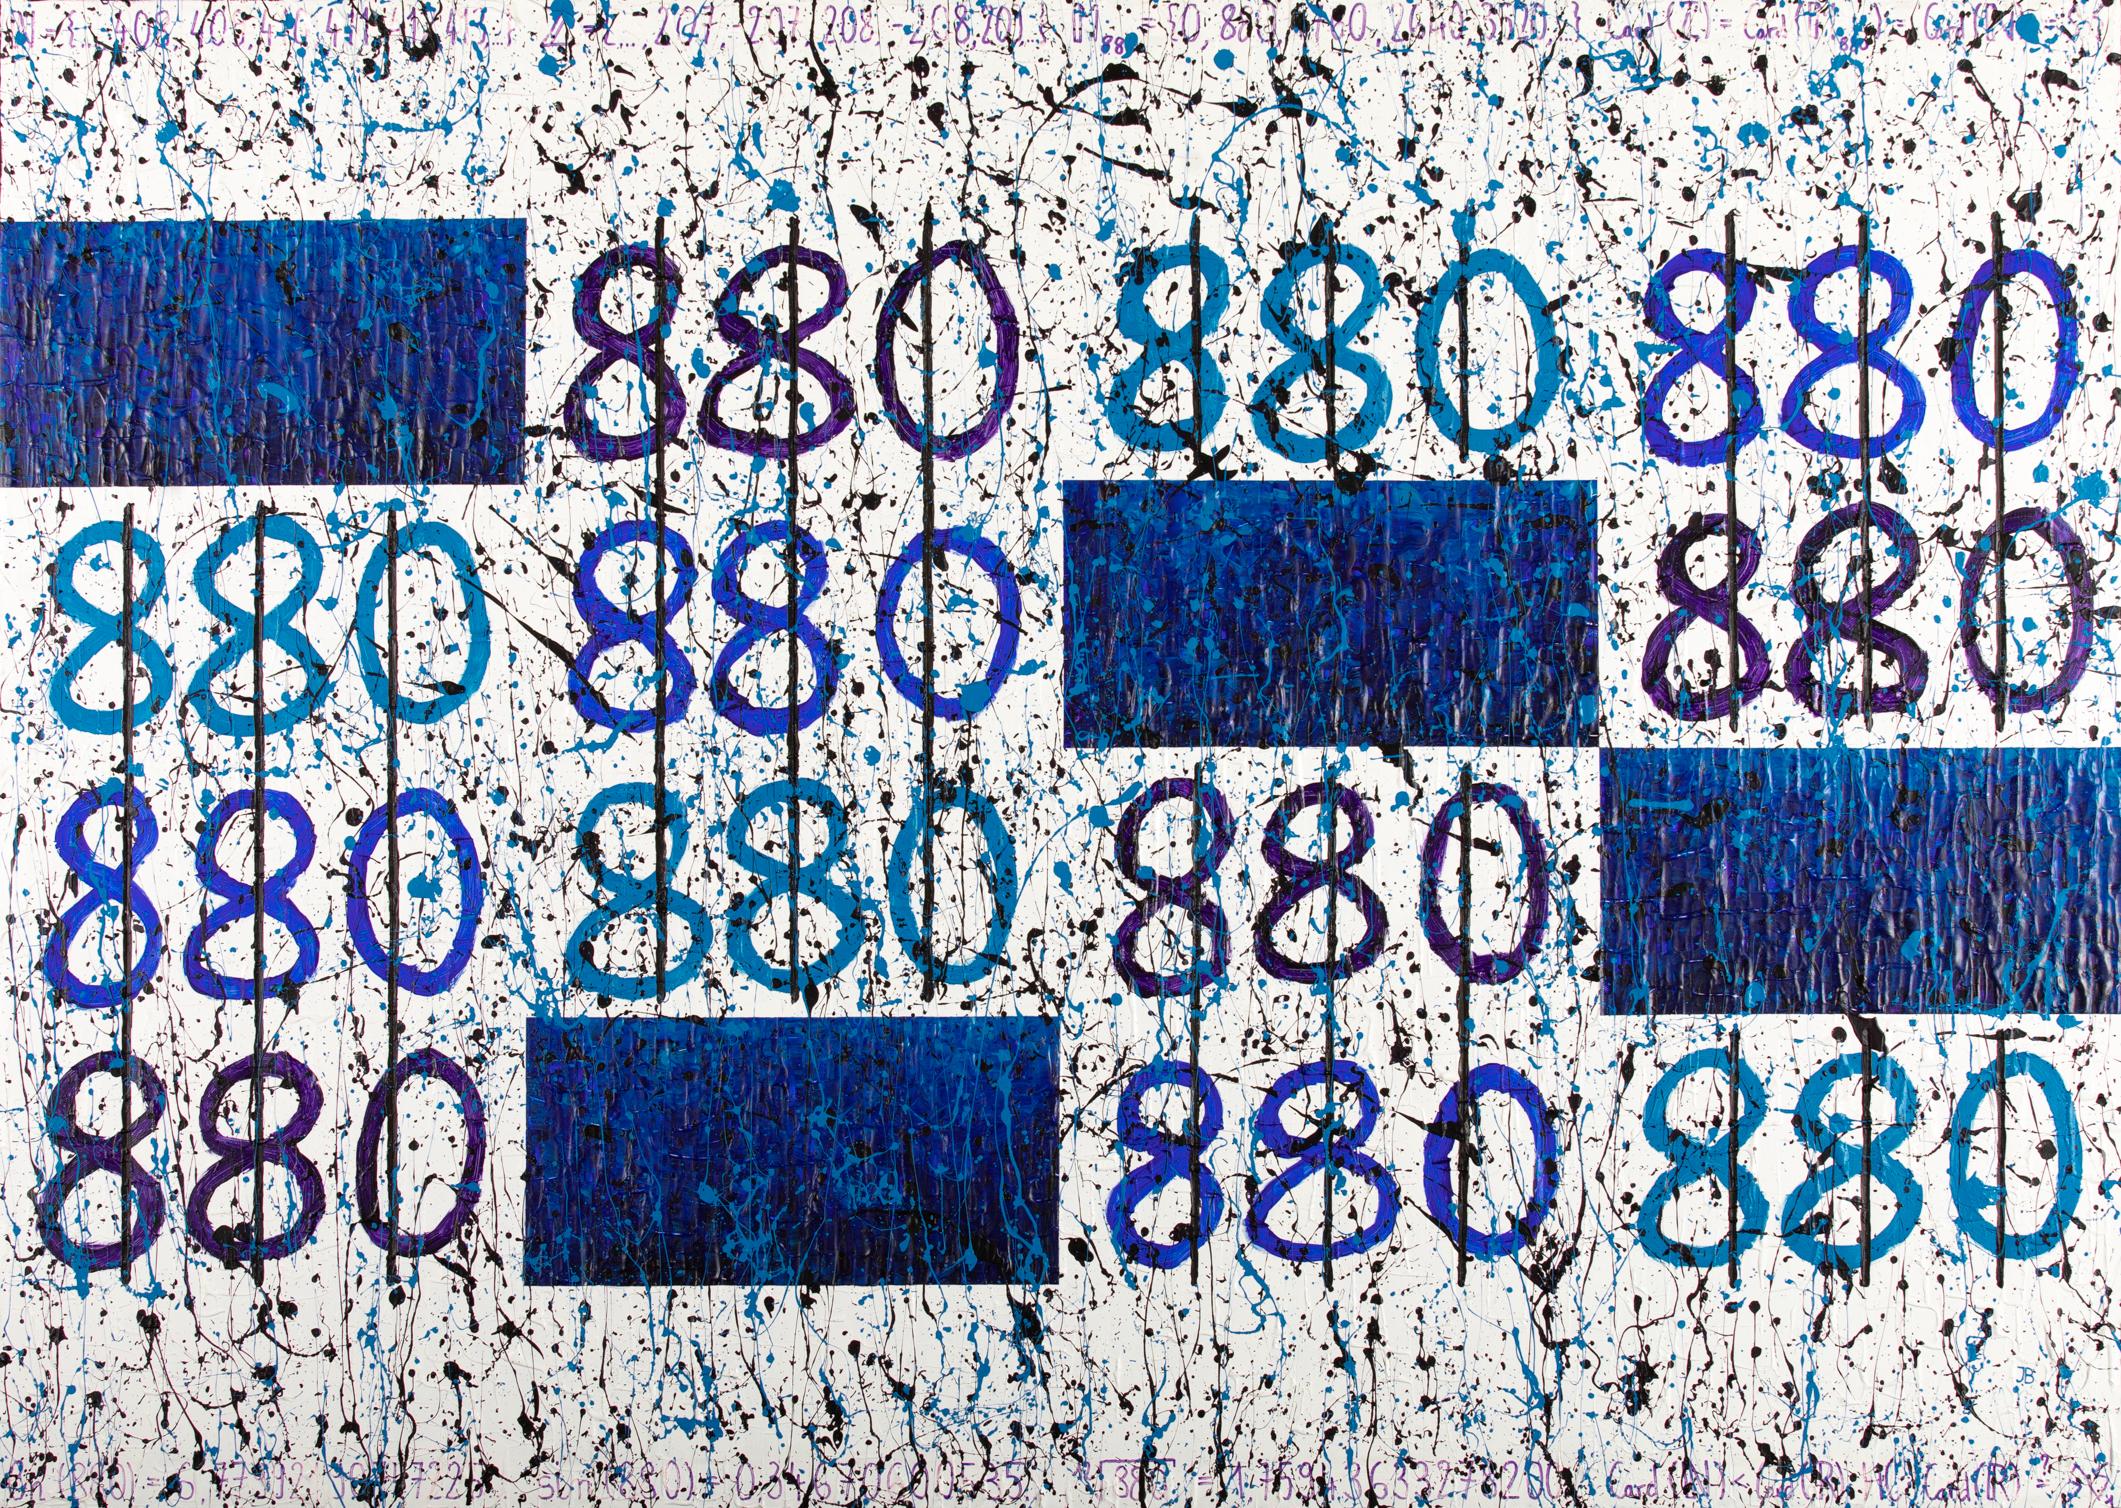 CANTORS' NUMBERS #880 - Painting by Jean-Claude Bossel 